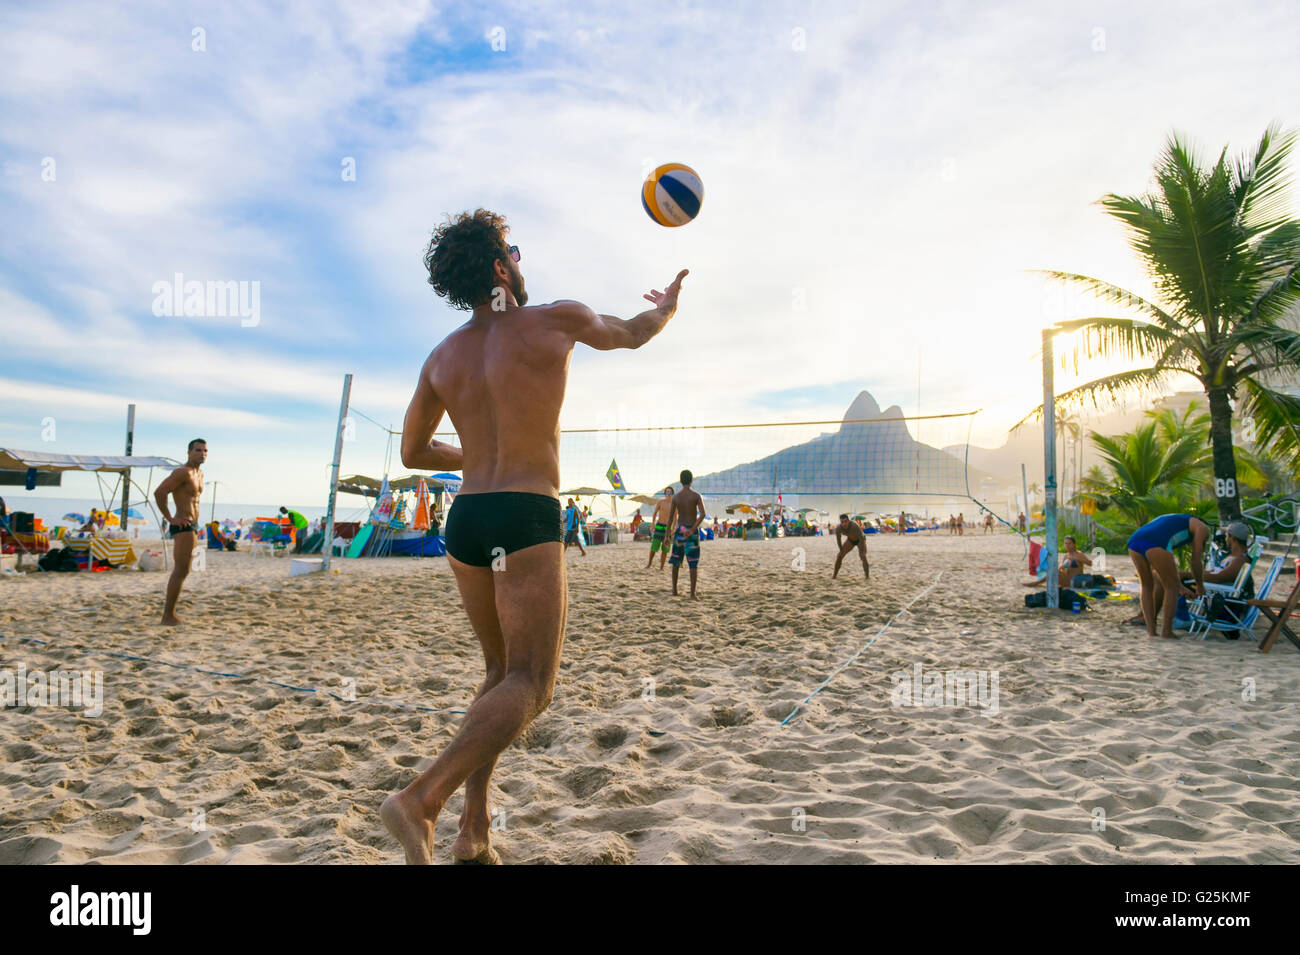 RIO DE JANEIRO - MARCH 20, 2016: Young Brazilians play beach volleyball, a sport Brazil is favored to win in the Olympic Games. Stock Photo